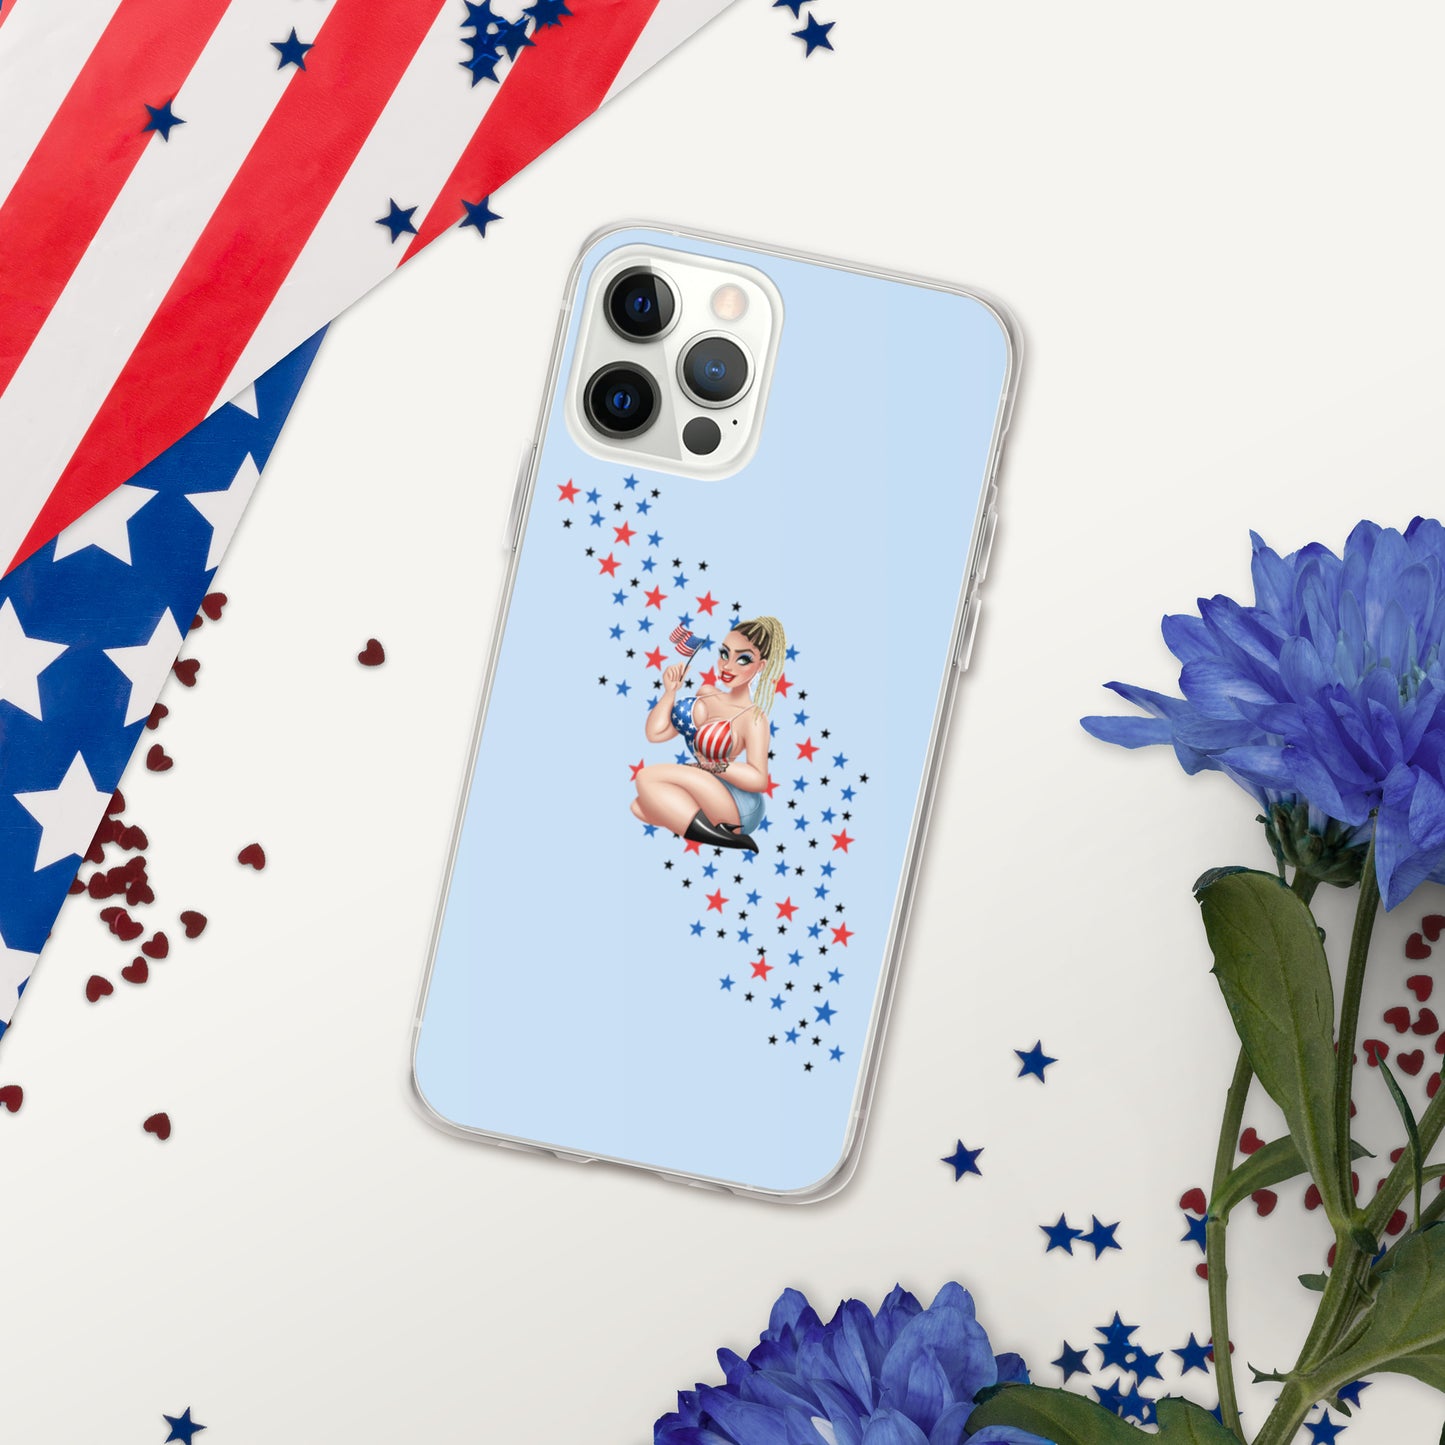 Romi Chase Star Spangled Banner iPhone Case